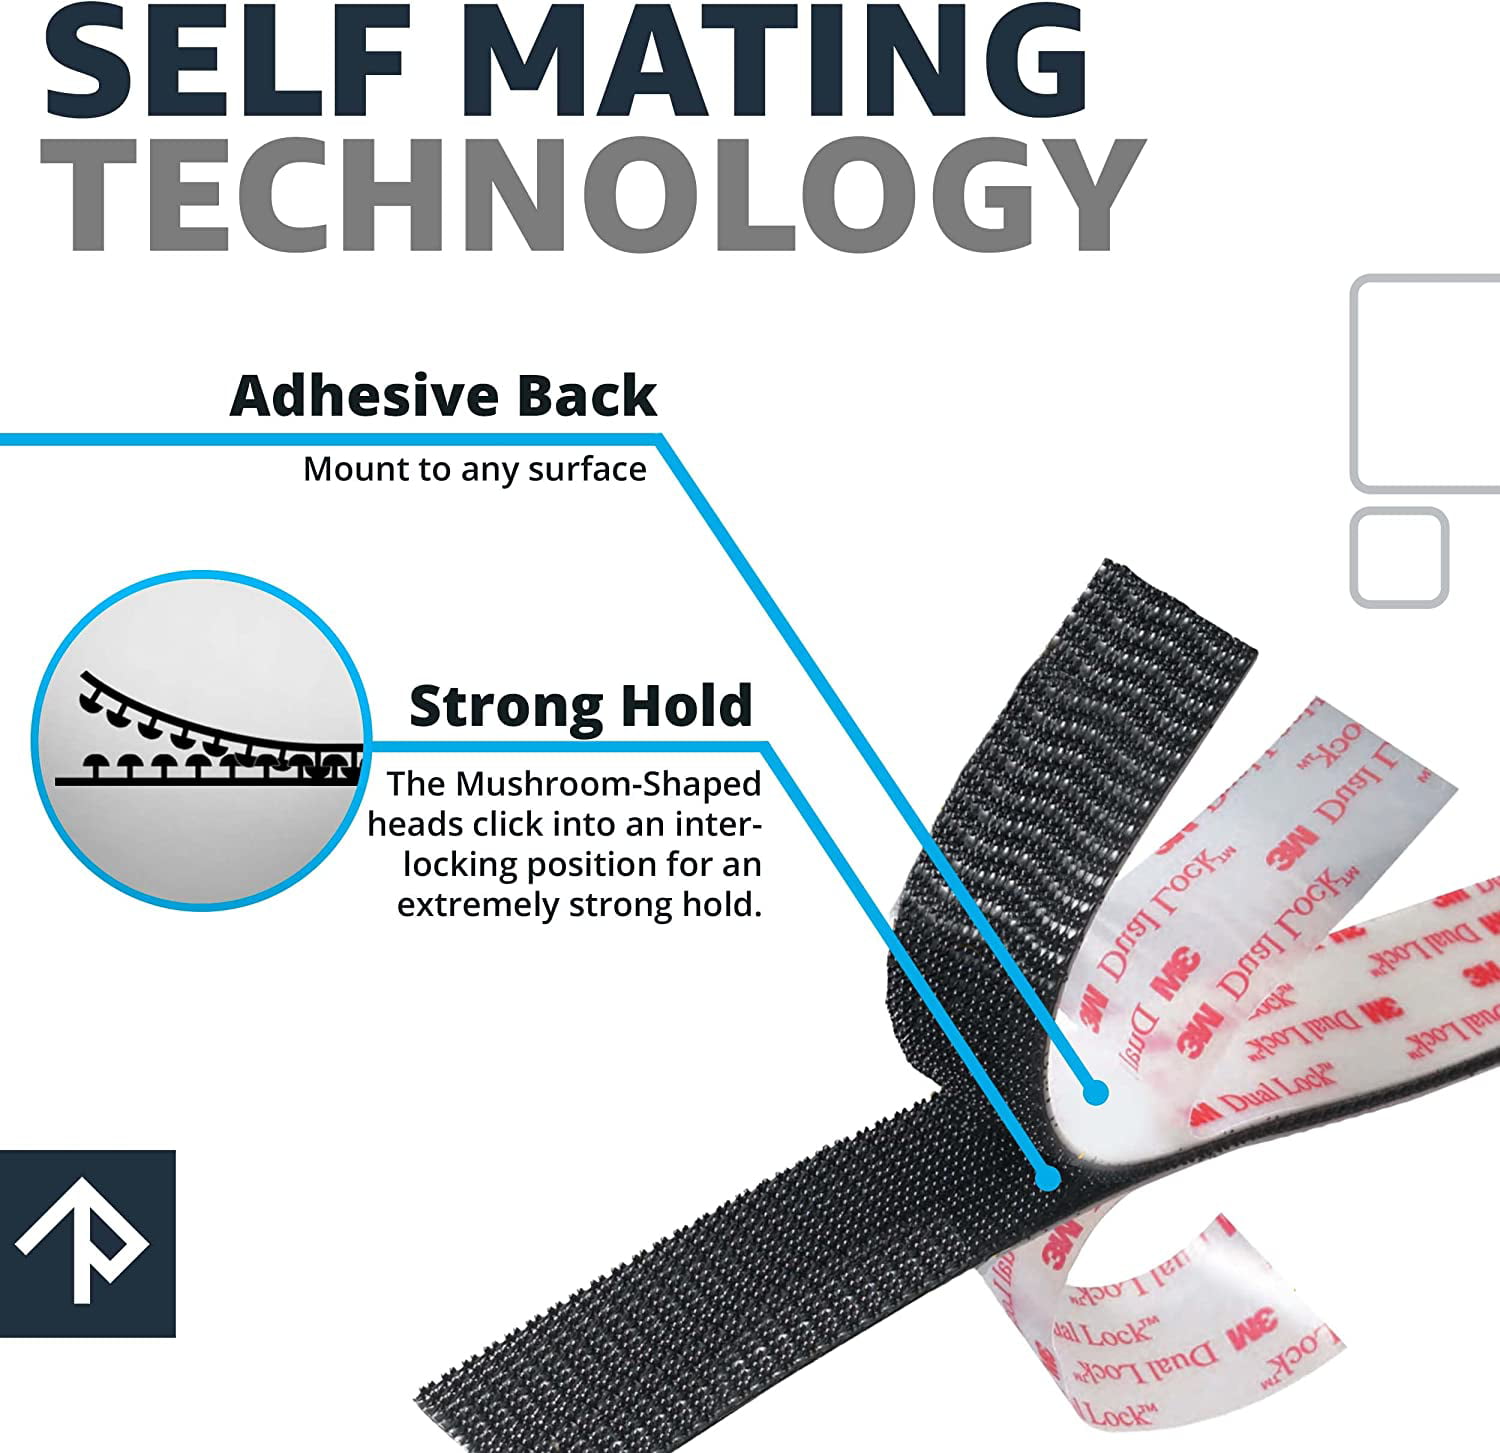 3M™ Dual Lock™ Strips with Clear Acrylic Adhesive